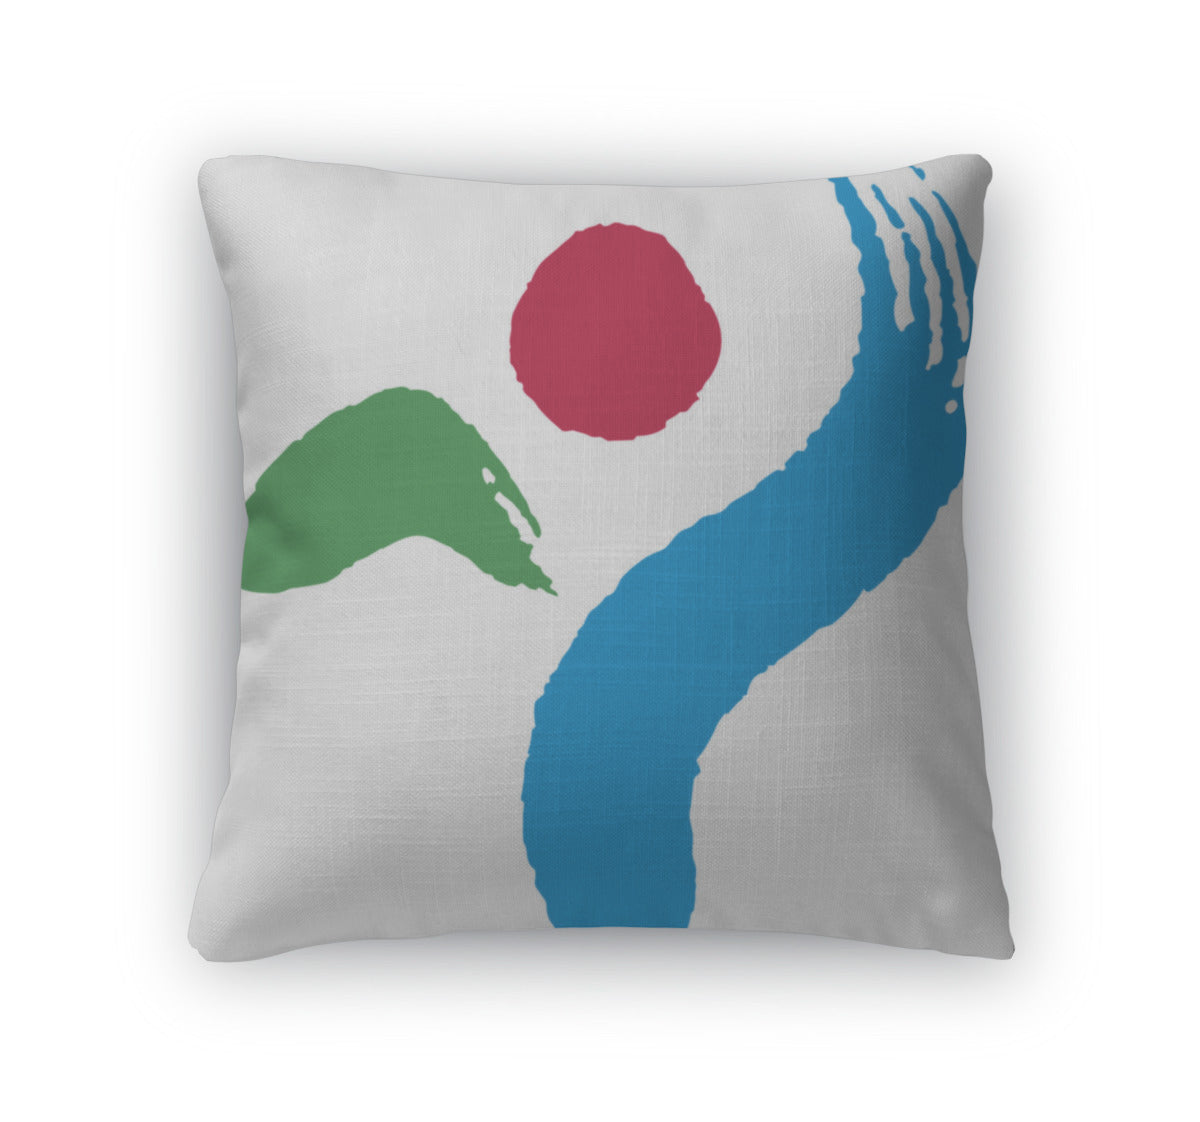 Throw Pillow, Coat Of Arms Of The City Of Seoul South Korea